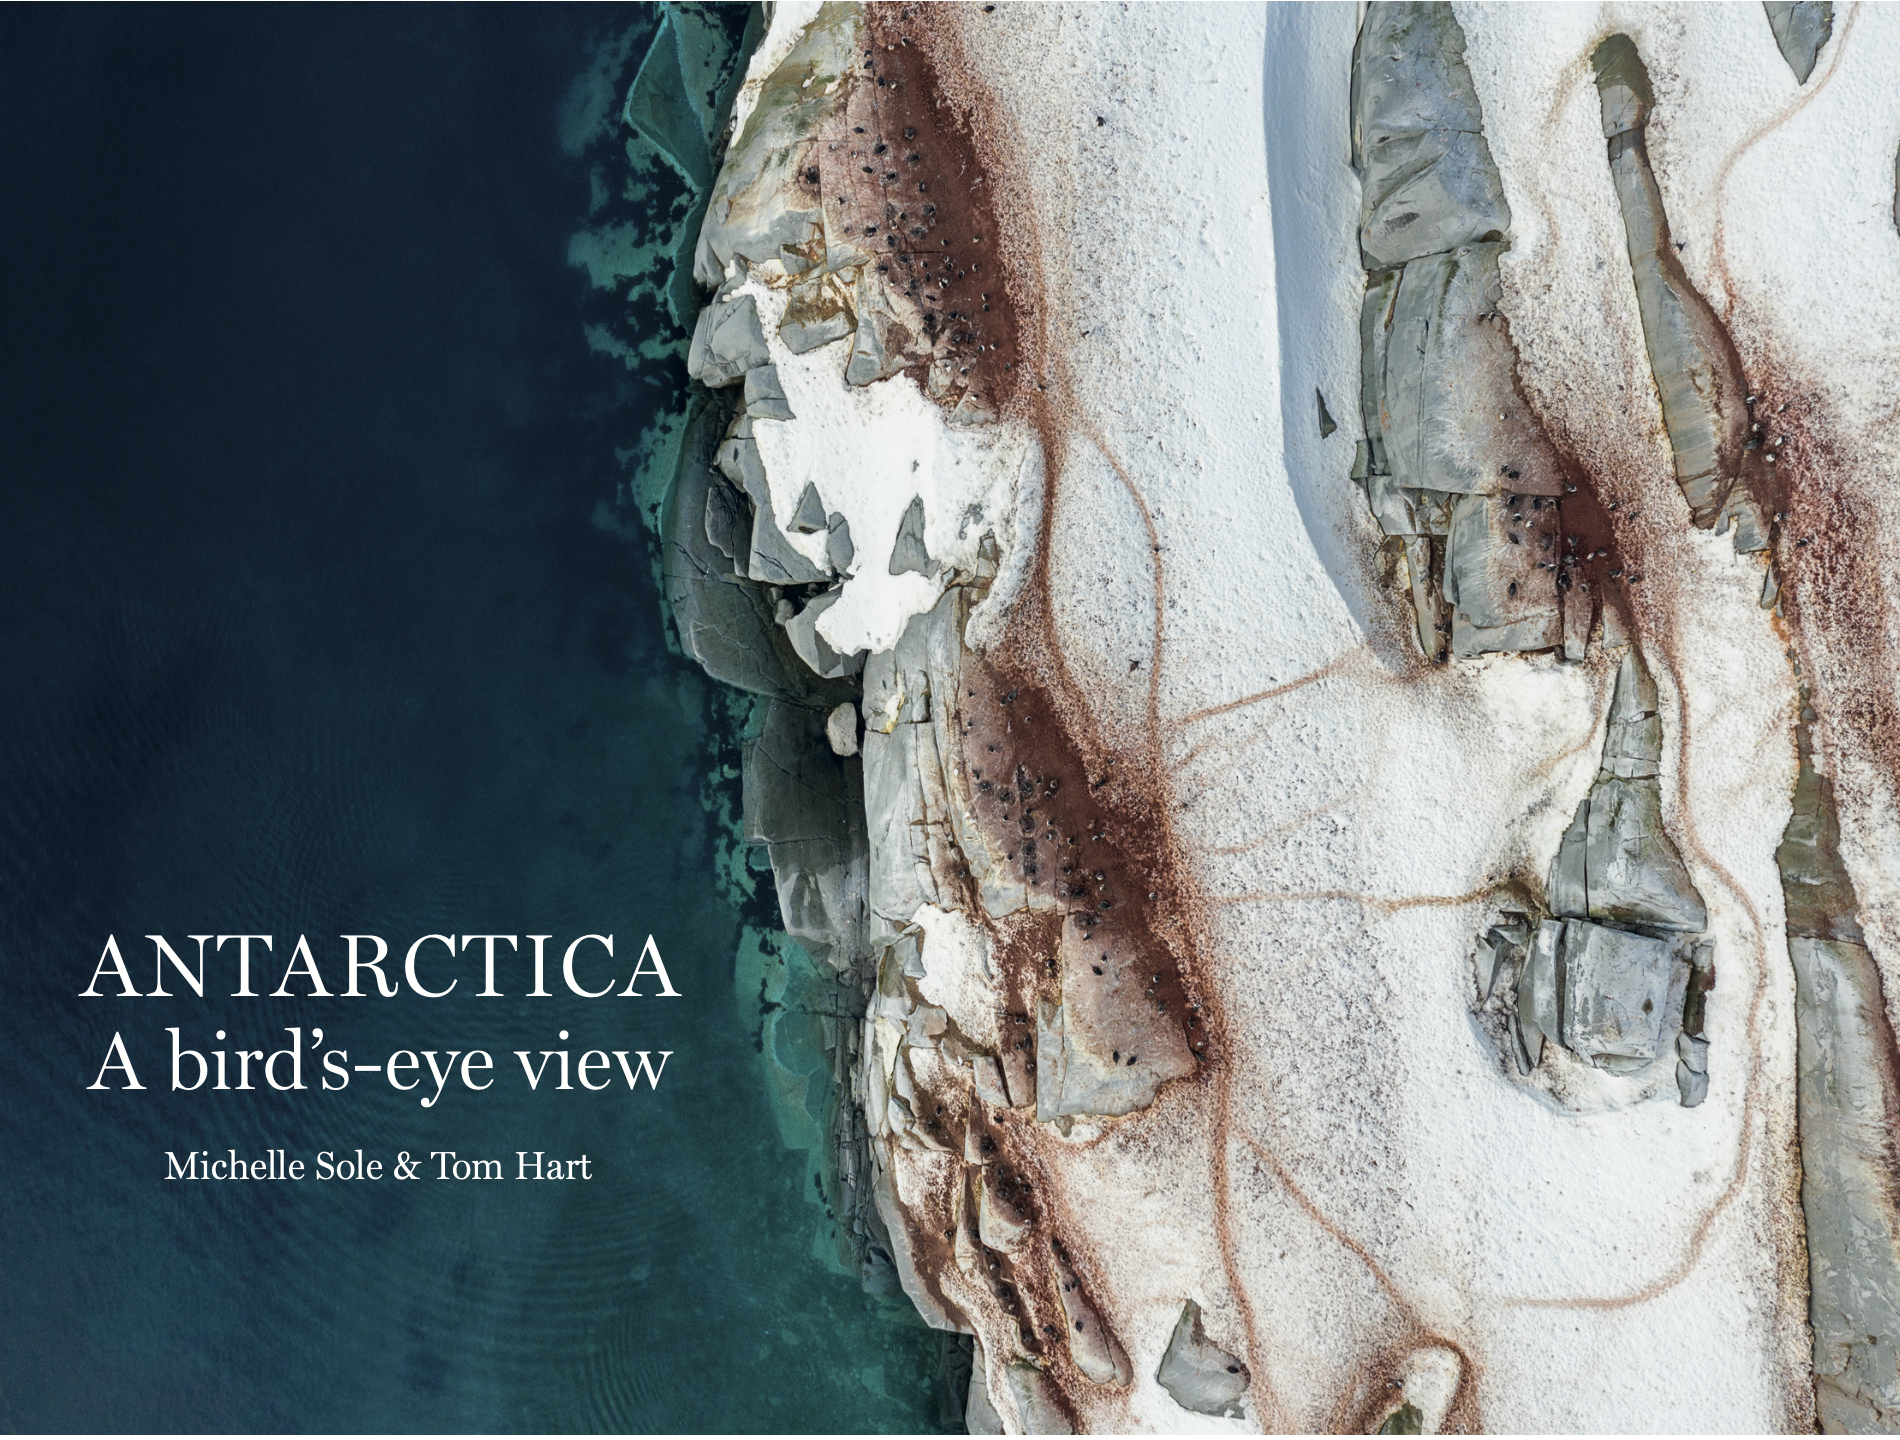 Antarctica: A Bird's-Eye View hardback book cover showing an aerial view of the edge of a cliff covered in snow and penguins.